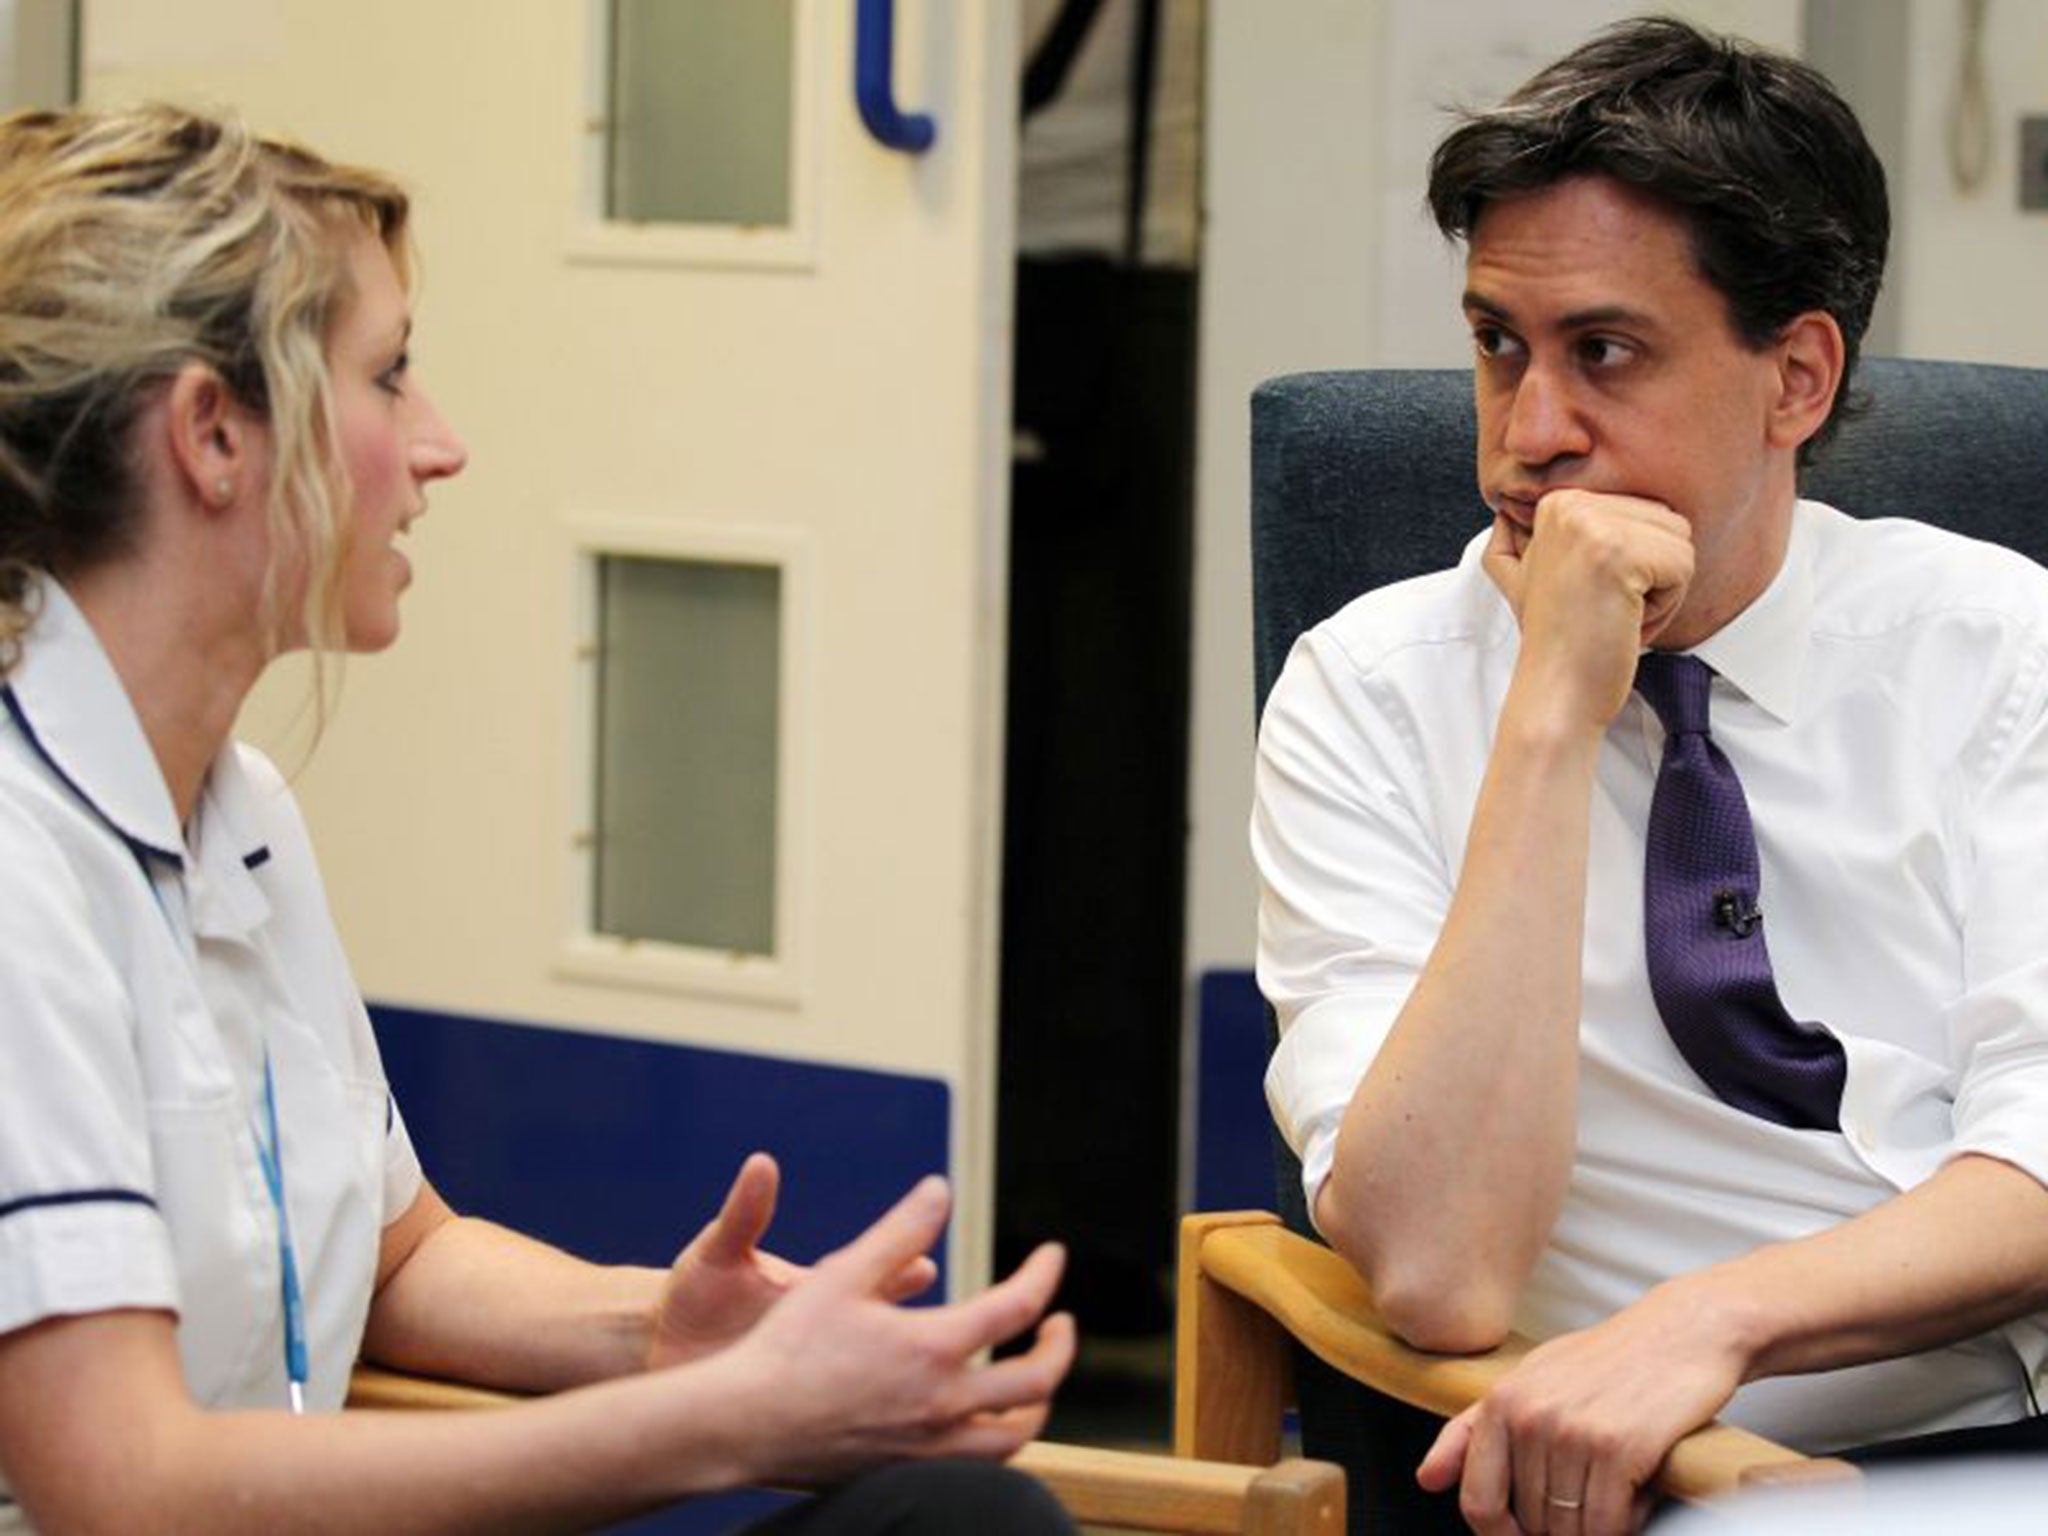 Ed Miliband paid a visit to Leighton Hospital in Crewe to speak with the staff about the NHS